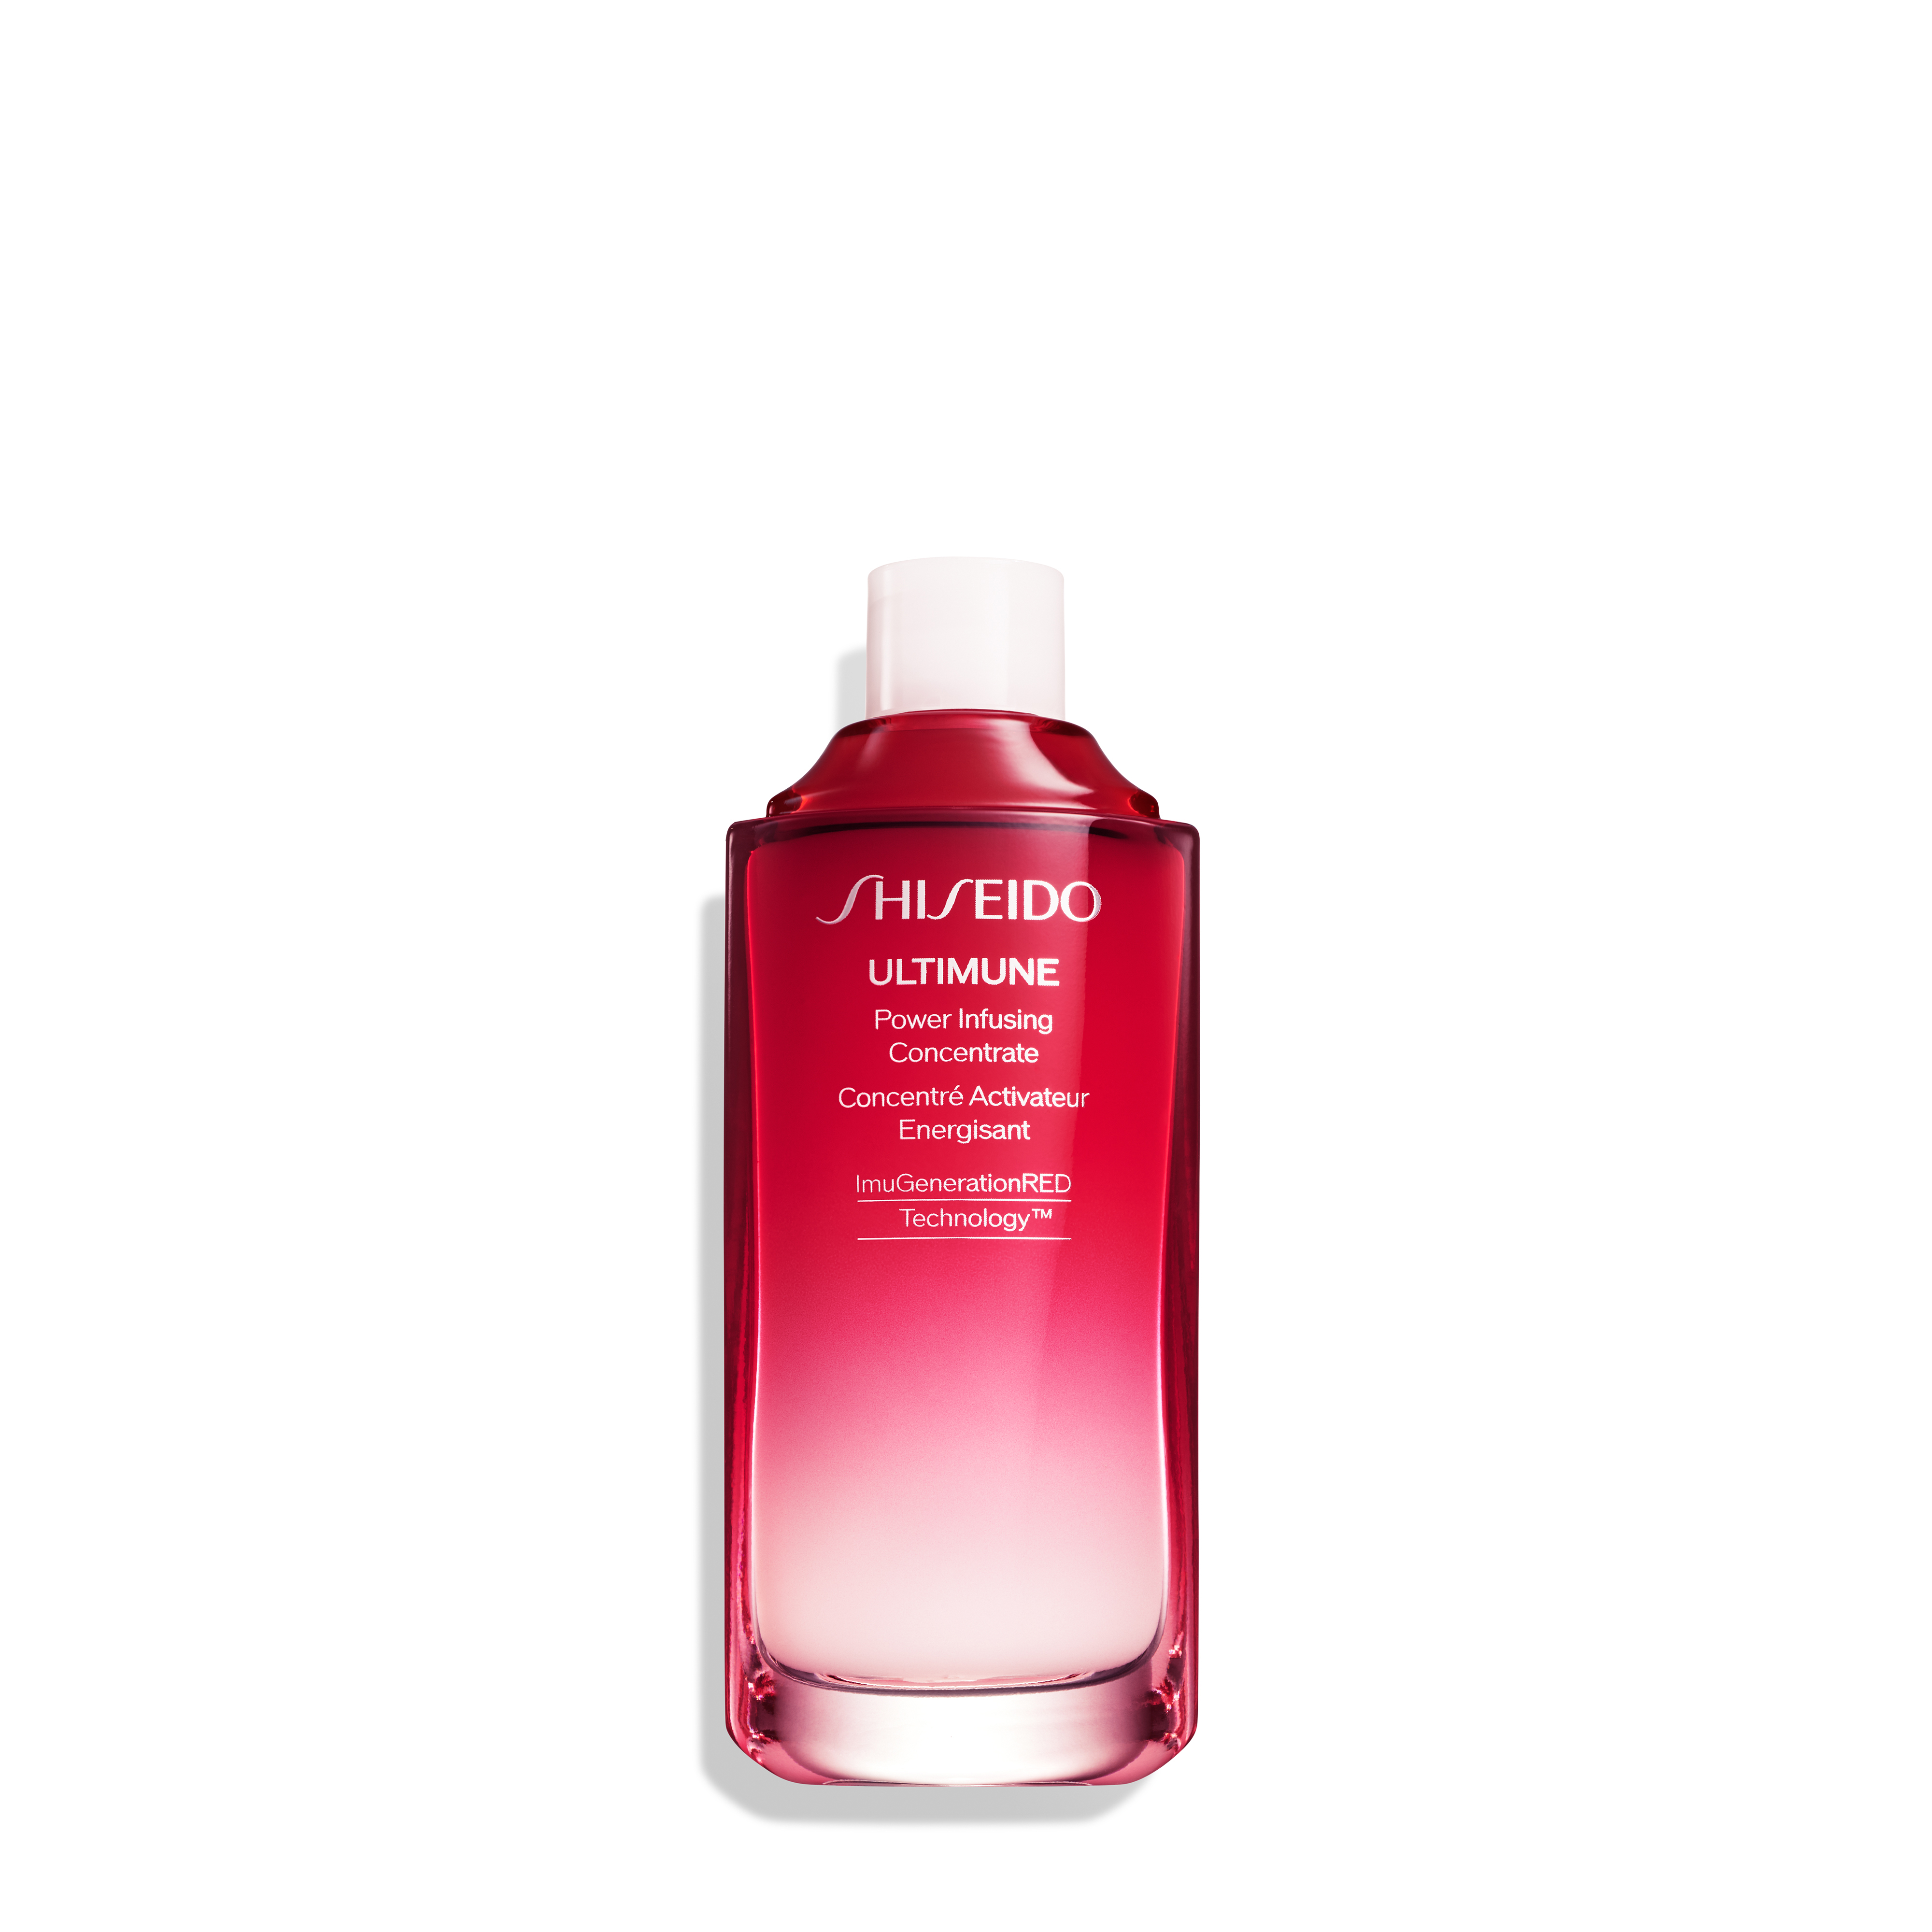 SHISEIDO-Power Infusing Concentrate - Refill